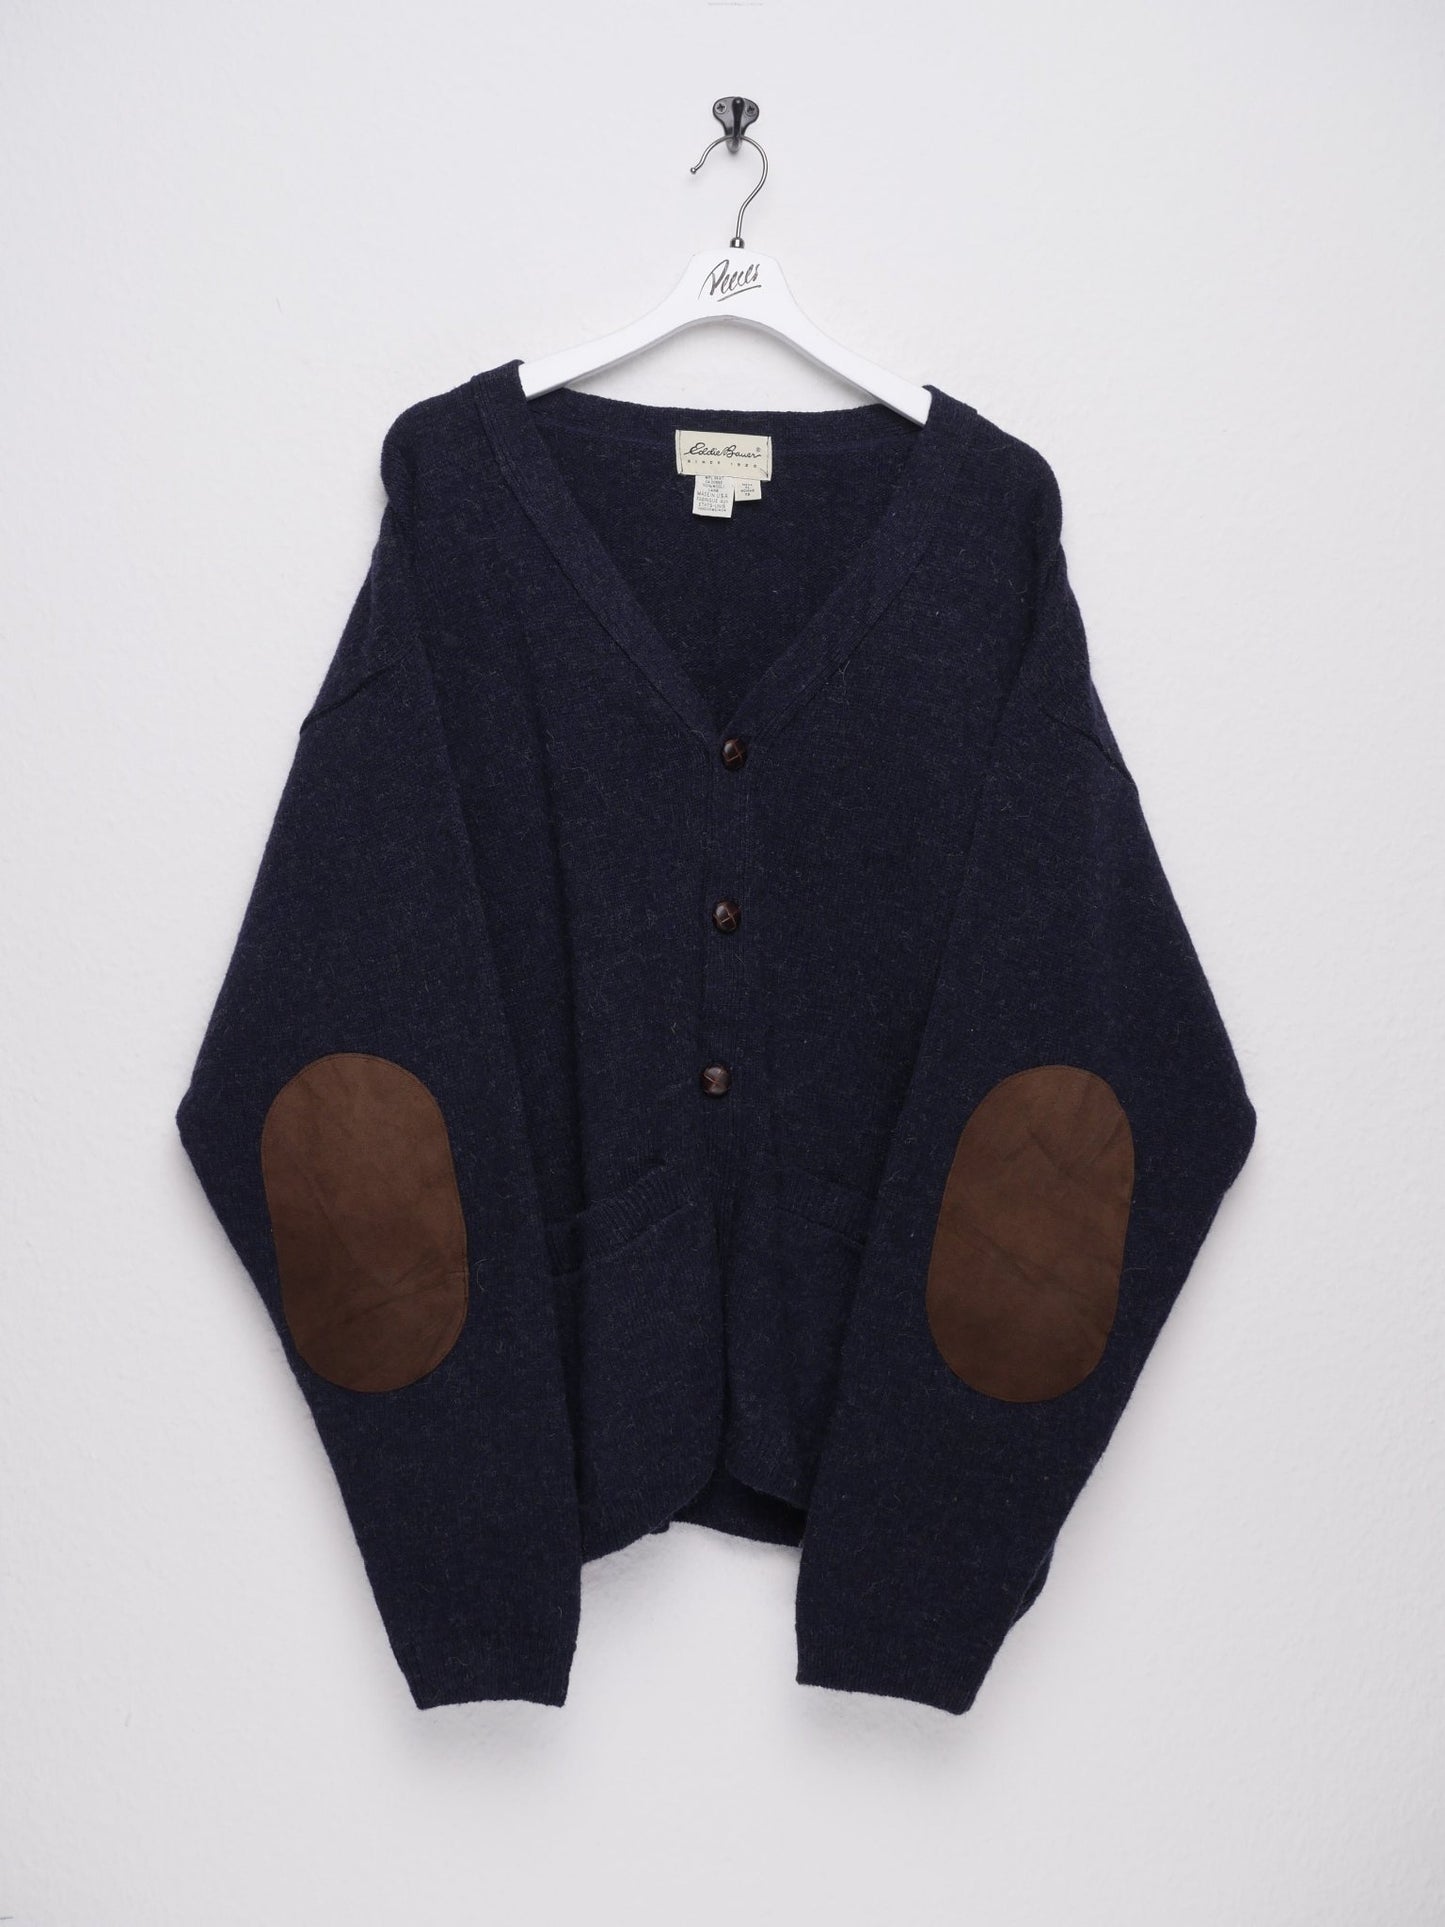 Vintage two toned wool Cardigan Sweater - Peeces